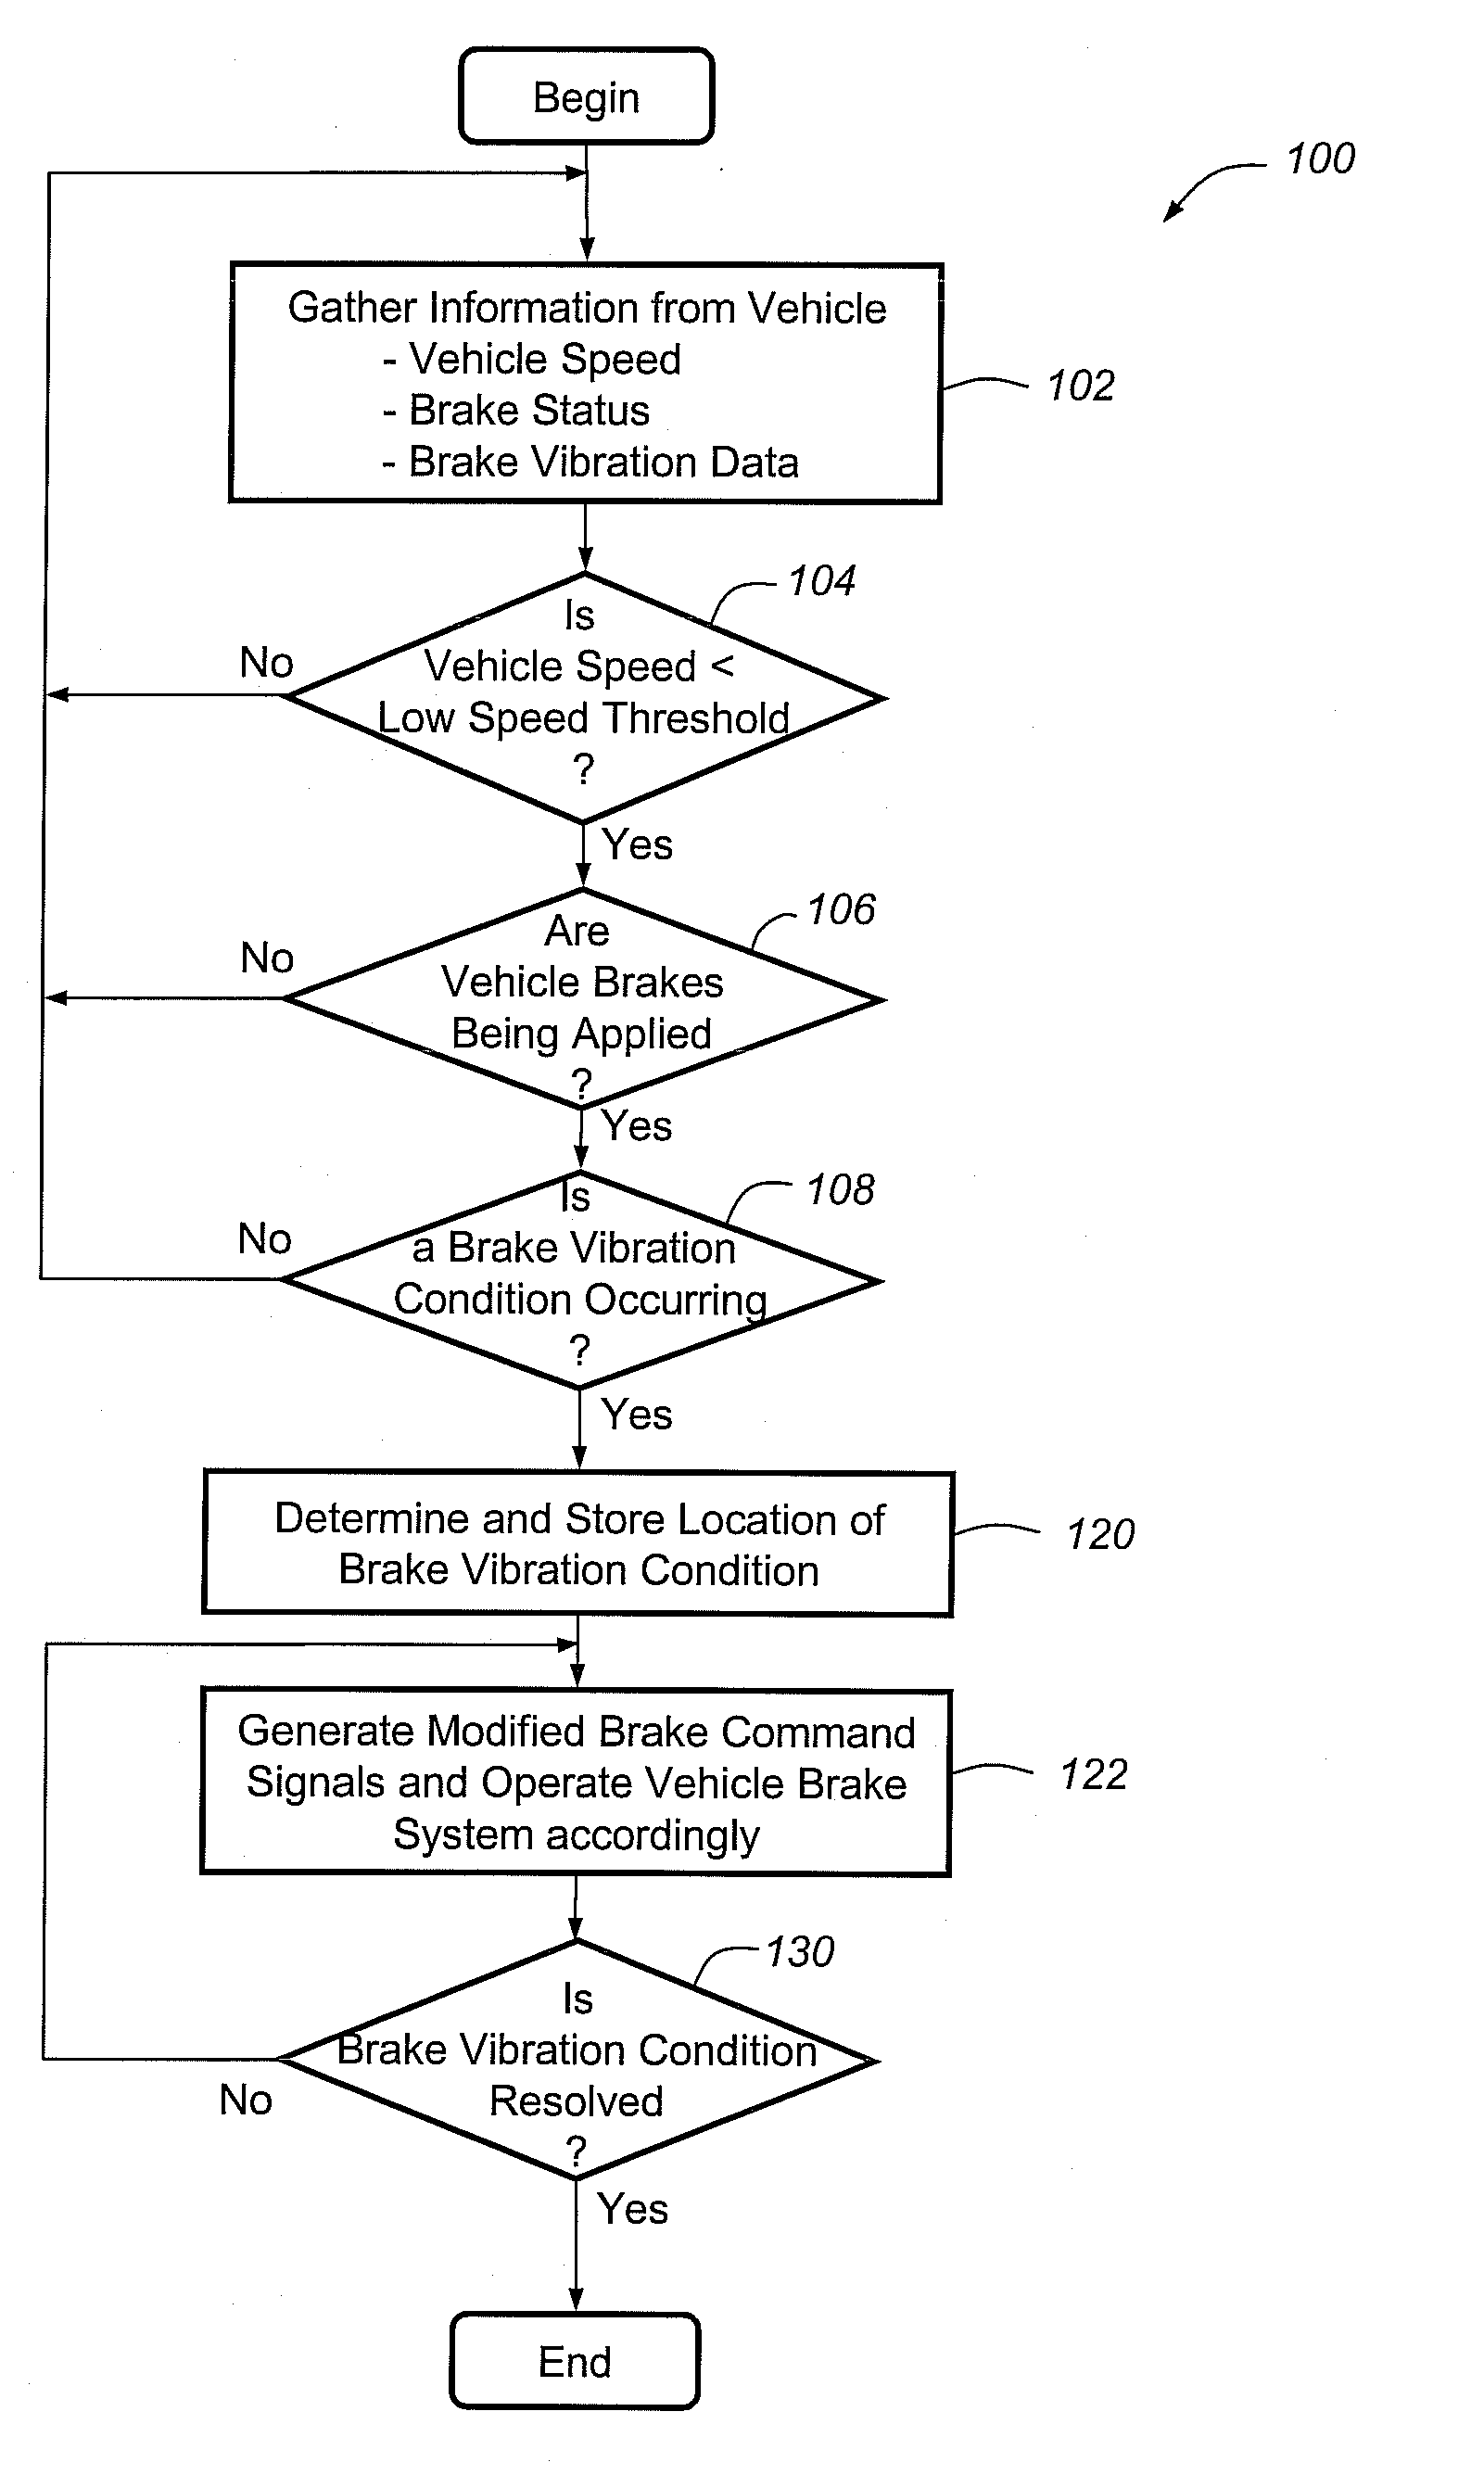 Method for operating a vehicle brake system